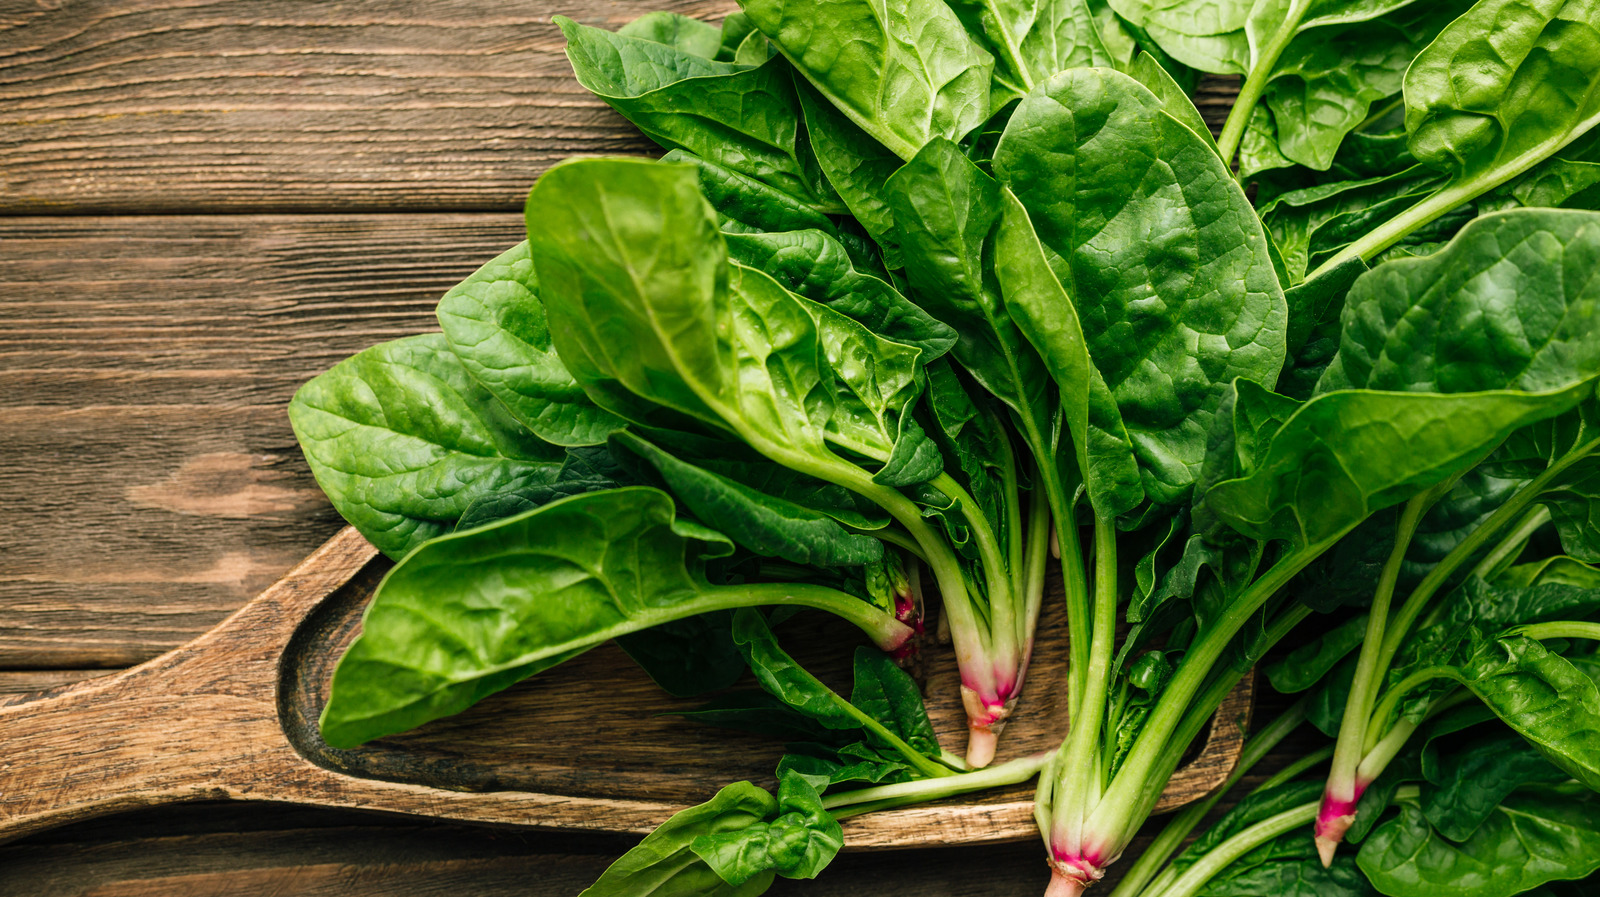 Raw Spinach Vs. Cooked Spinach: Which One Is Better For You?